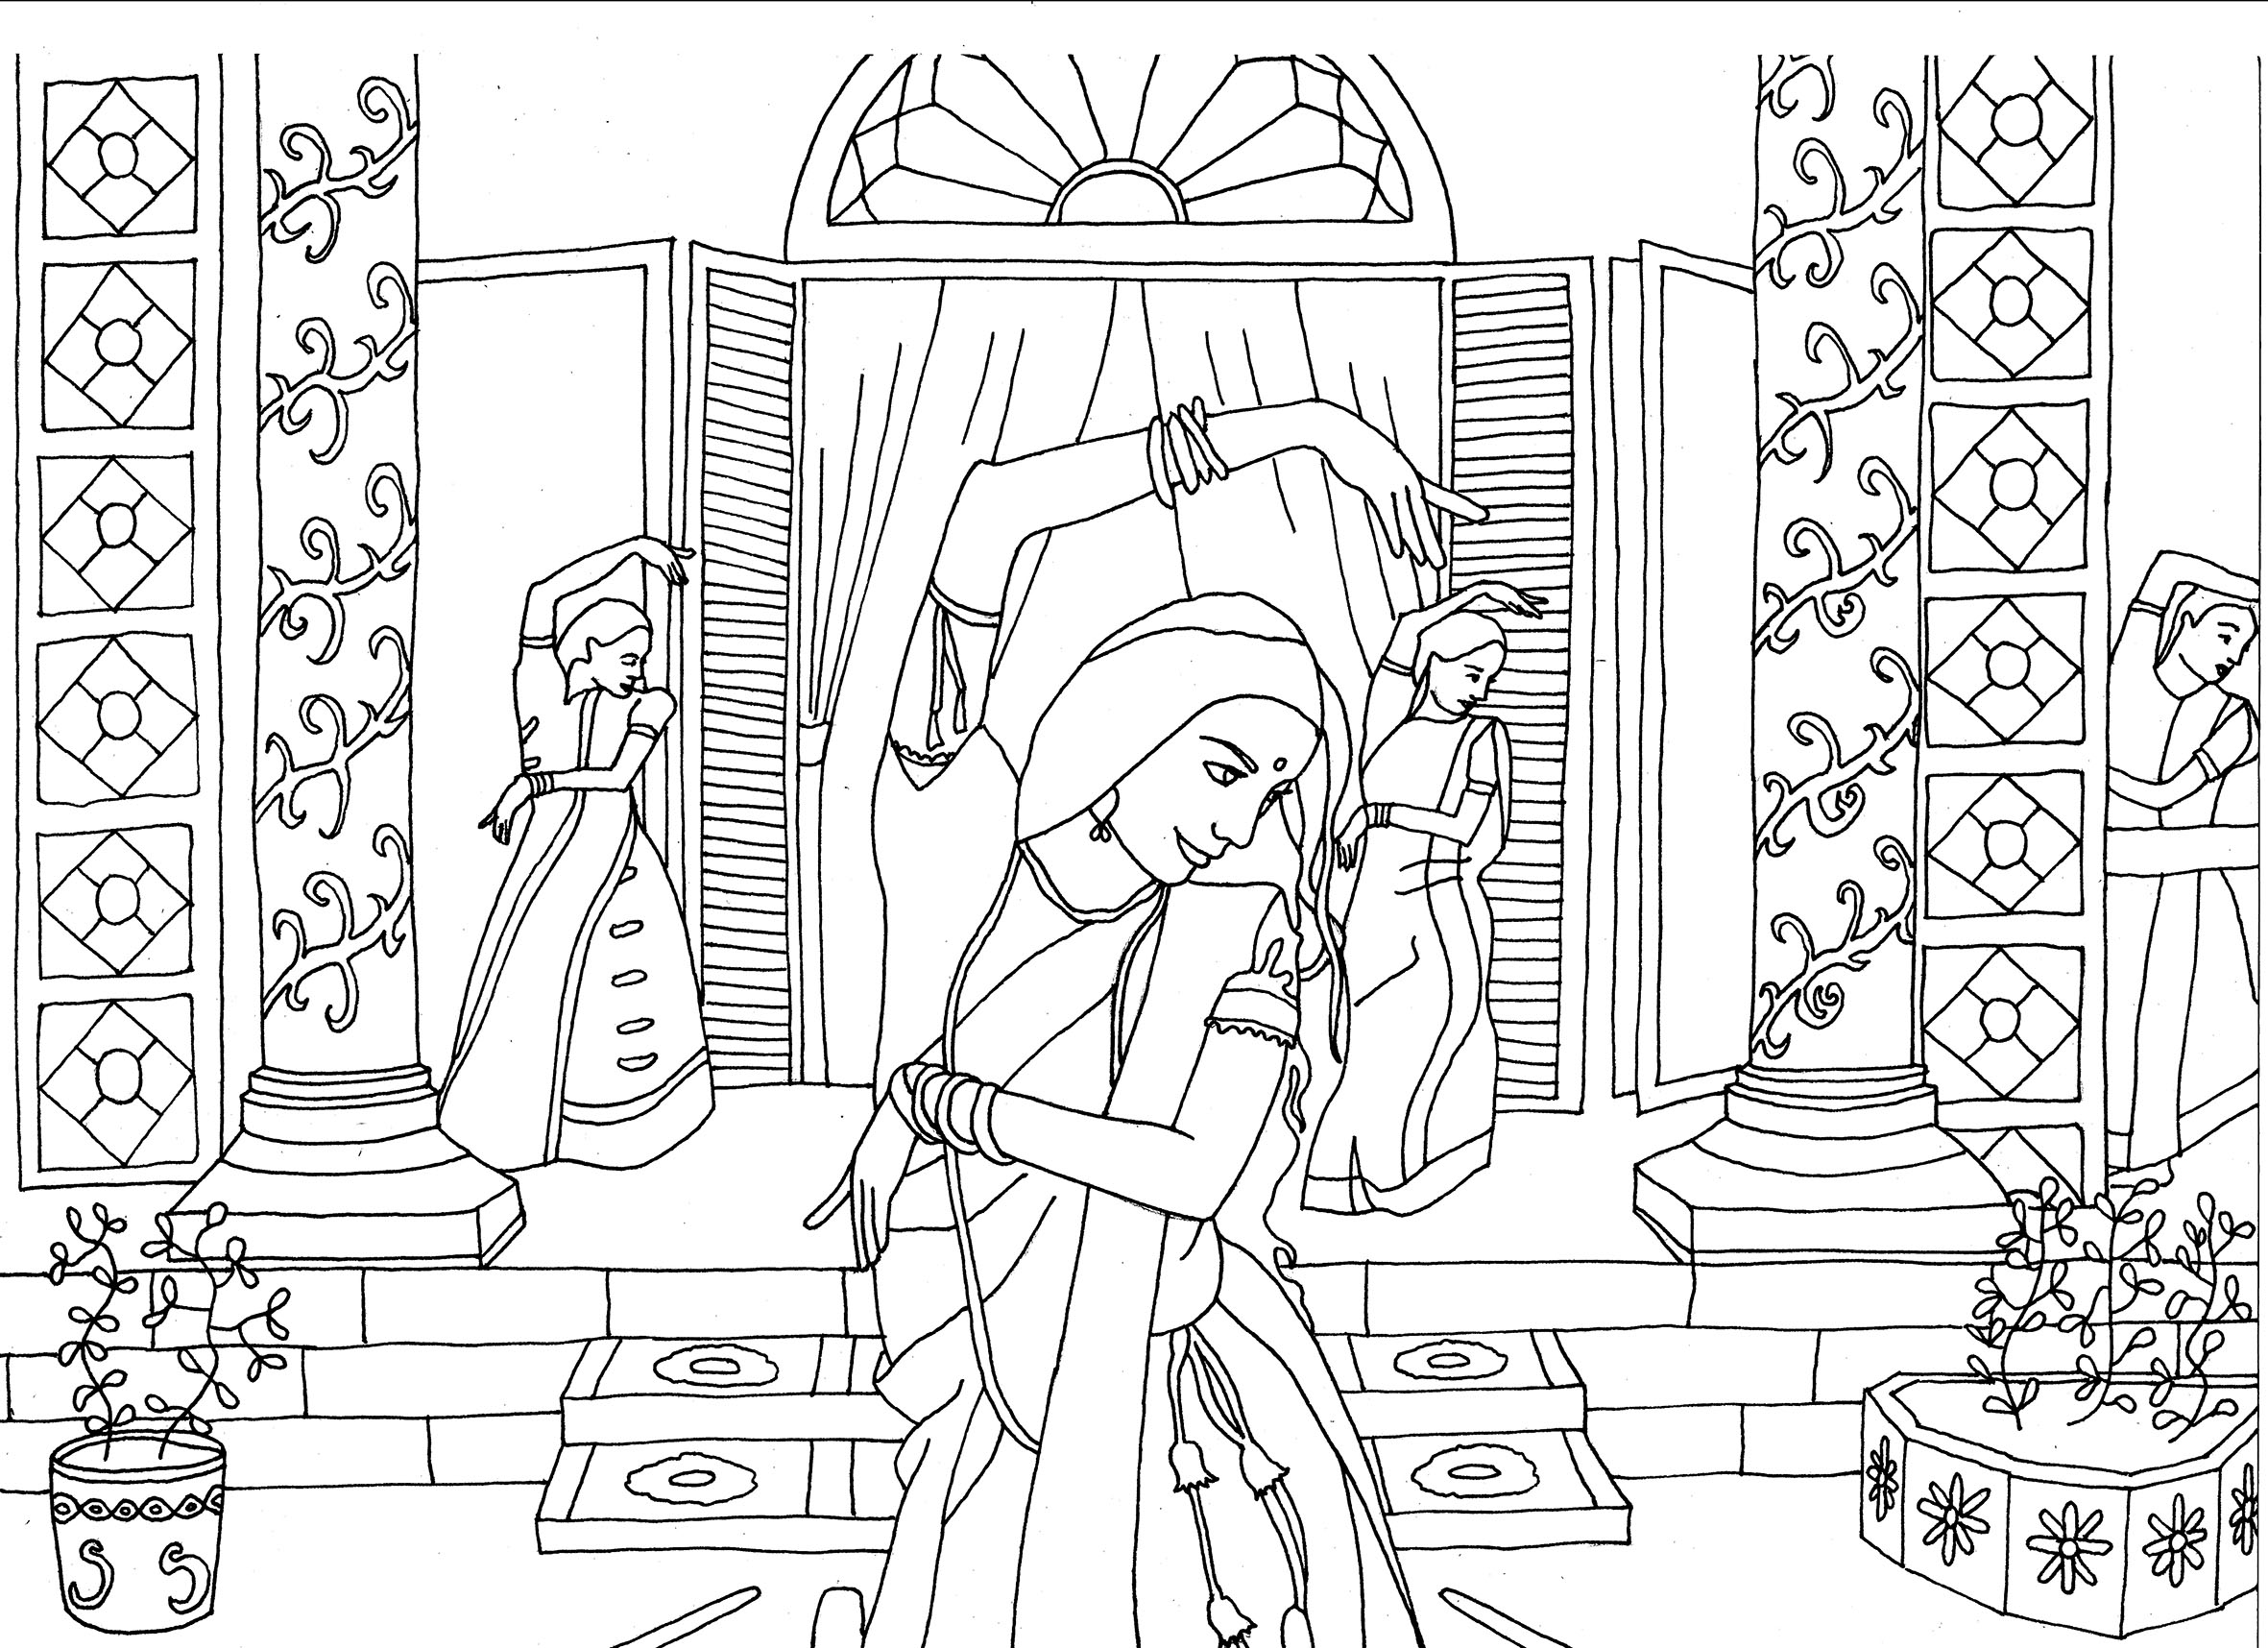 Simple Adult coloring page for kids